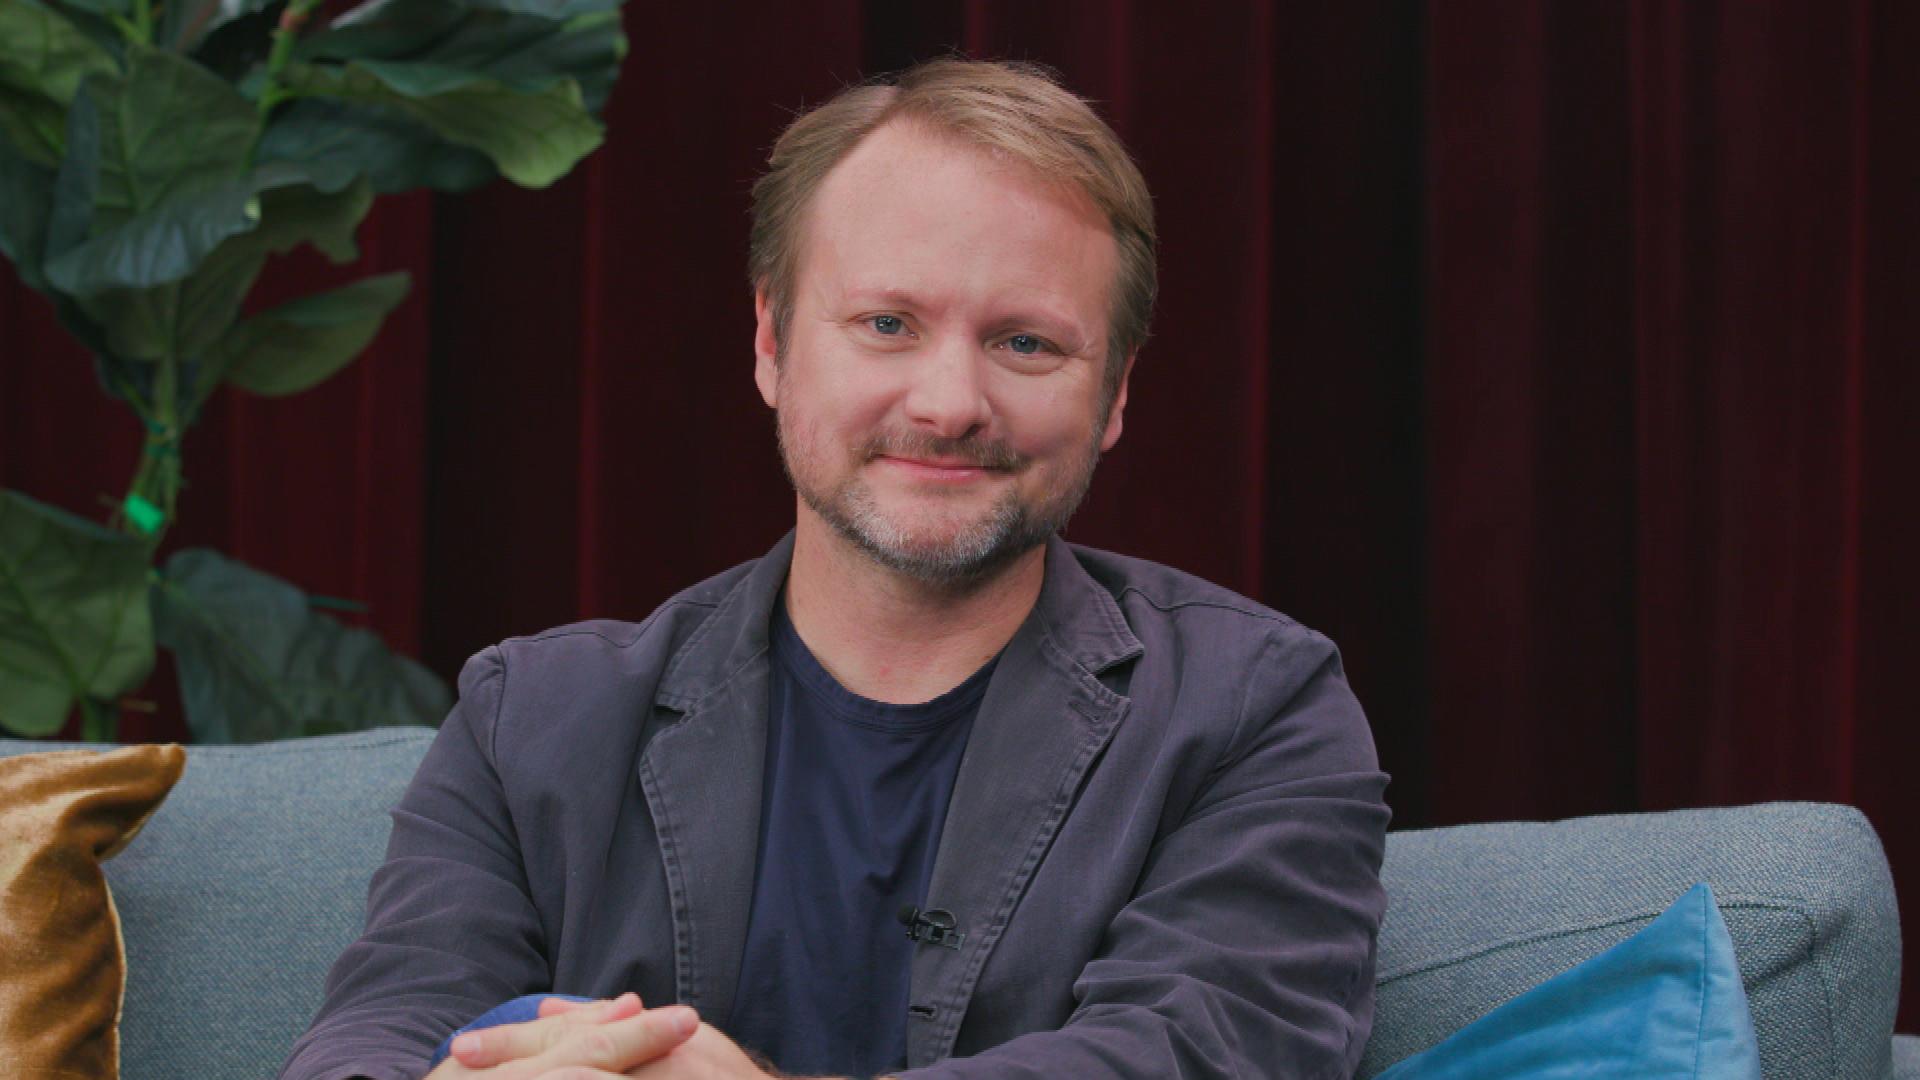 Watch Director Rian Johnson Breaks Down His Most Iconic Films